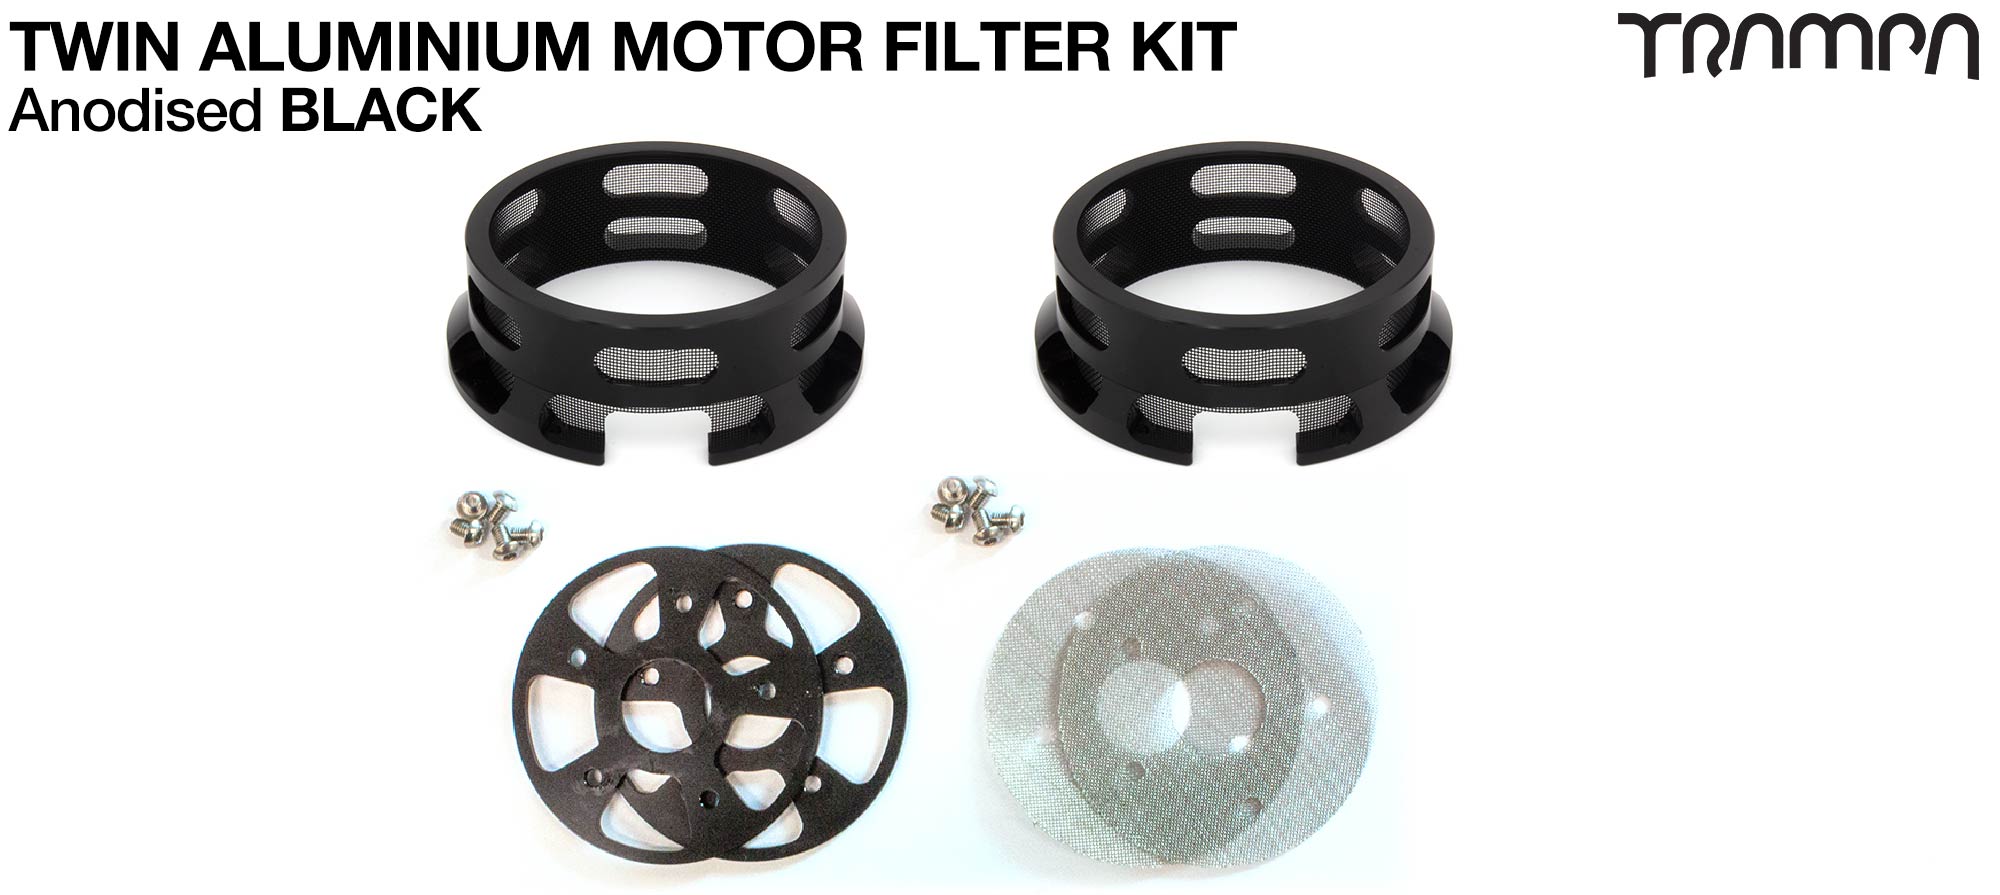 14FiFties HALF CAGE Motor protection - BLACK anodised with Filter & Fan - TWIN